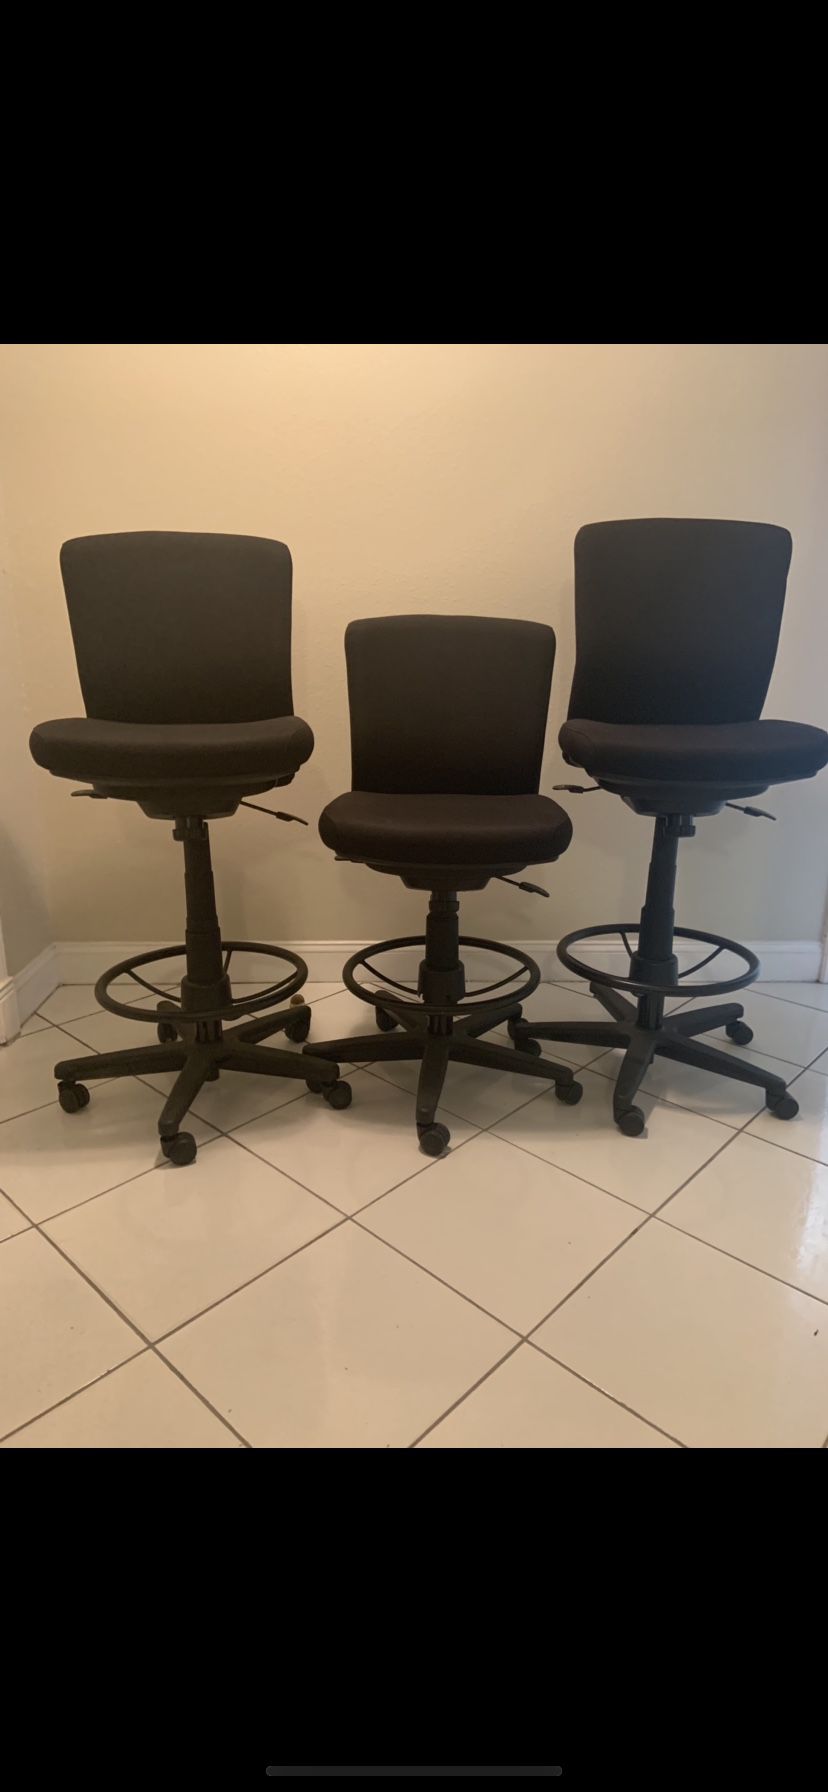 Kimball office chairs